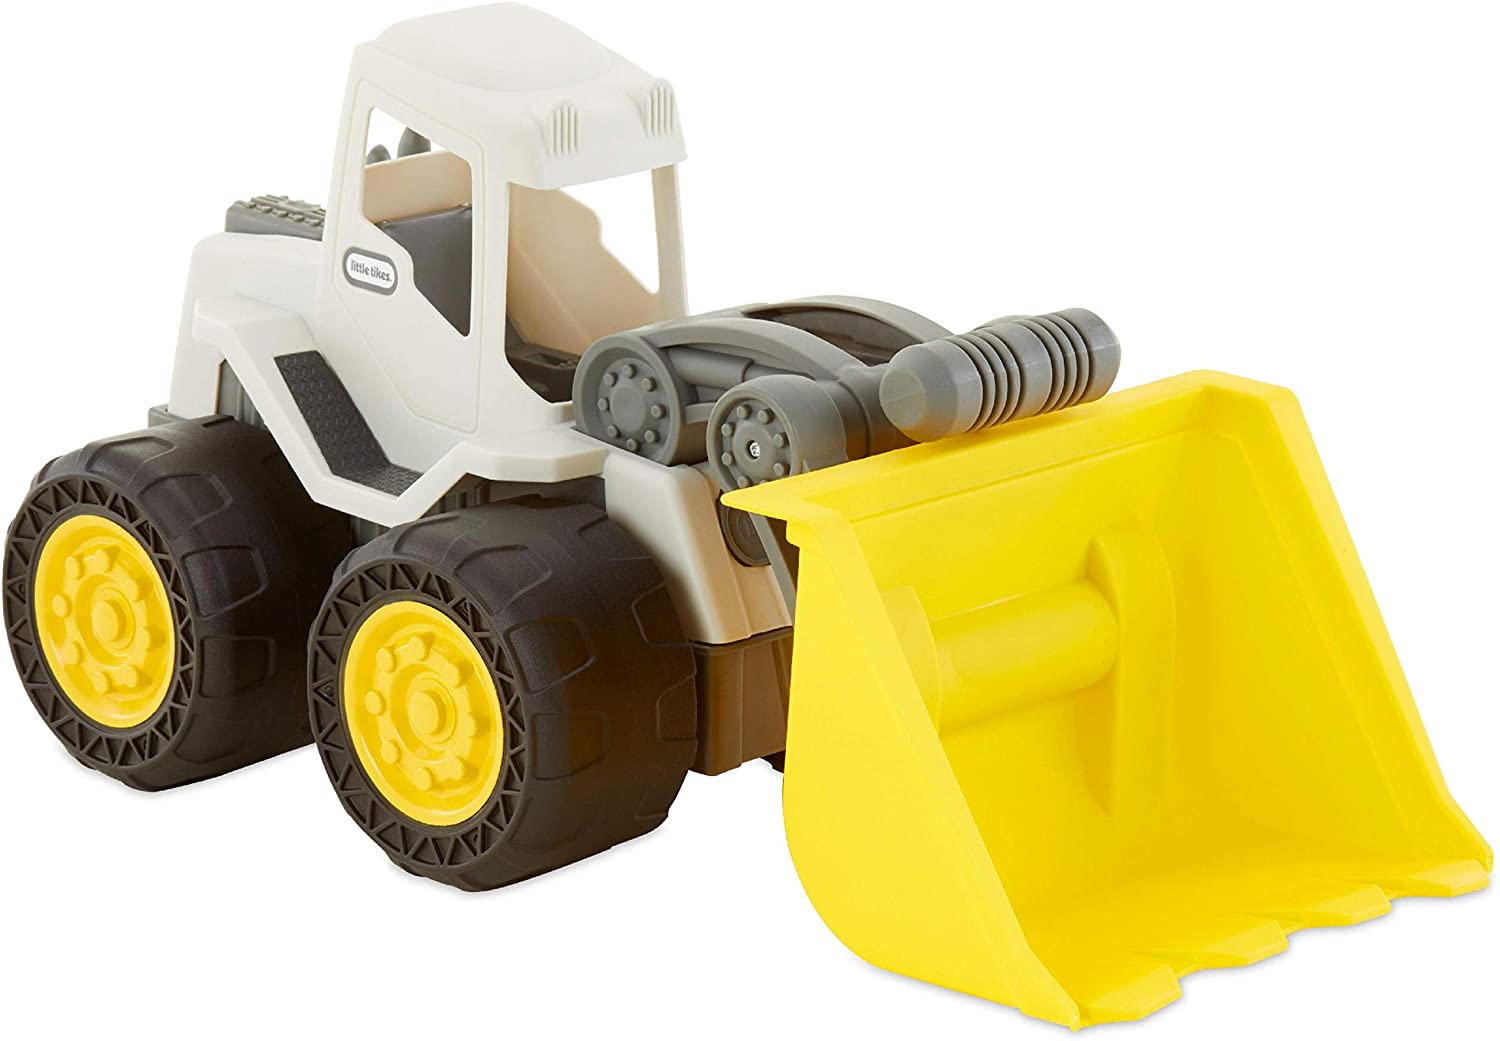 LITTLE TIKES 650550 DIRT DIGGER 2 IN 1 FRONT LOADER